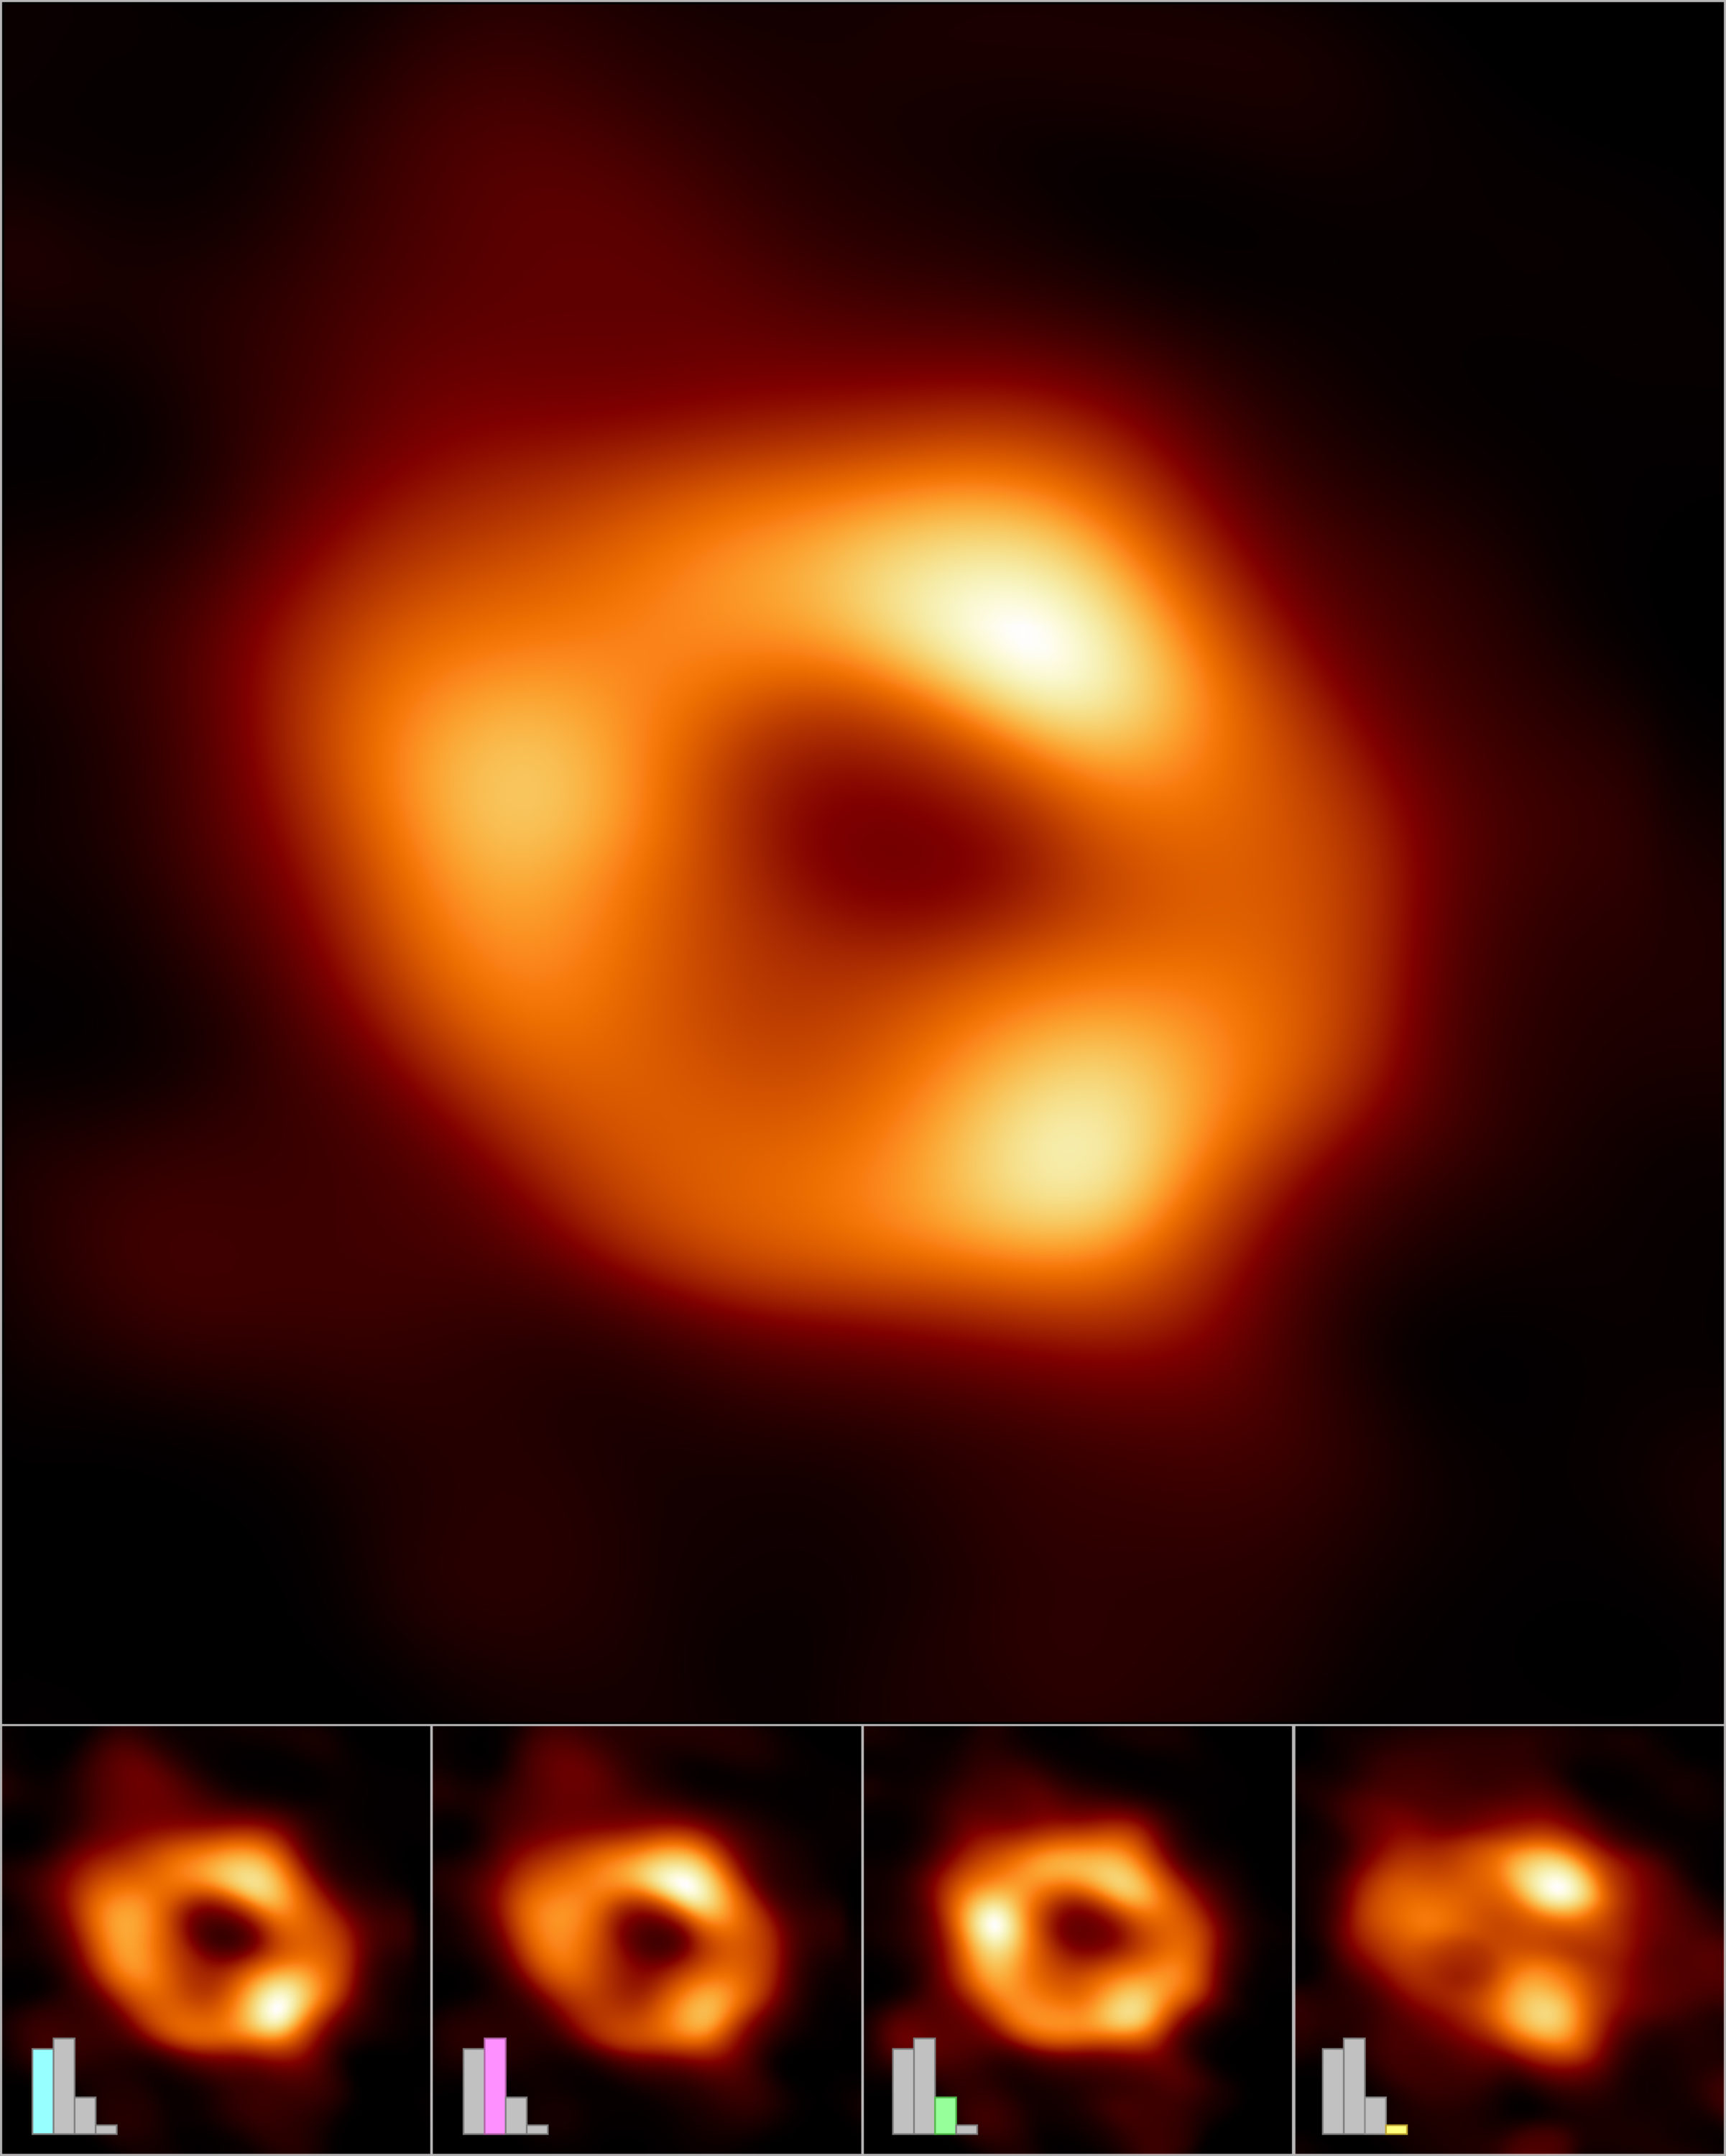 The Event Horizon Telescope (EHT) Collaboration has created a single image (top frame) of the supermassive black hole at the center of our galaxy, called Sagittarius A* (or Sgr A* for short), by combining images extracted from the EHT observations. The main image was produced by averaging together thousands of images created using different computational methods — all of which accurately fit the EHT data. This averaged image retains features more commonly seen in the varied images, and suppresses features that appear infrequently. The images can also be clustered into four groups based on similar features. An averaged, representative image for each of the four clusters is shown in the bottom row. Three of the clusters show a ring structure but, with differently distributed brightness around the ring. The fourth cluster contains images that also fit the data but do not appear ring-like. The bar graphs show the relative number of images belonging to each cluster. Thousands of images fell into each of the first three clusters, while the fourth and smallest cluster contains only hundreds of images. The heights of the bars indicate the relative "weights," or contributions, of each cluster to the averaged image at top. Image credit: EHT Collaboration